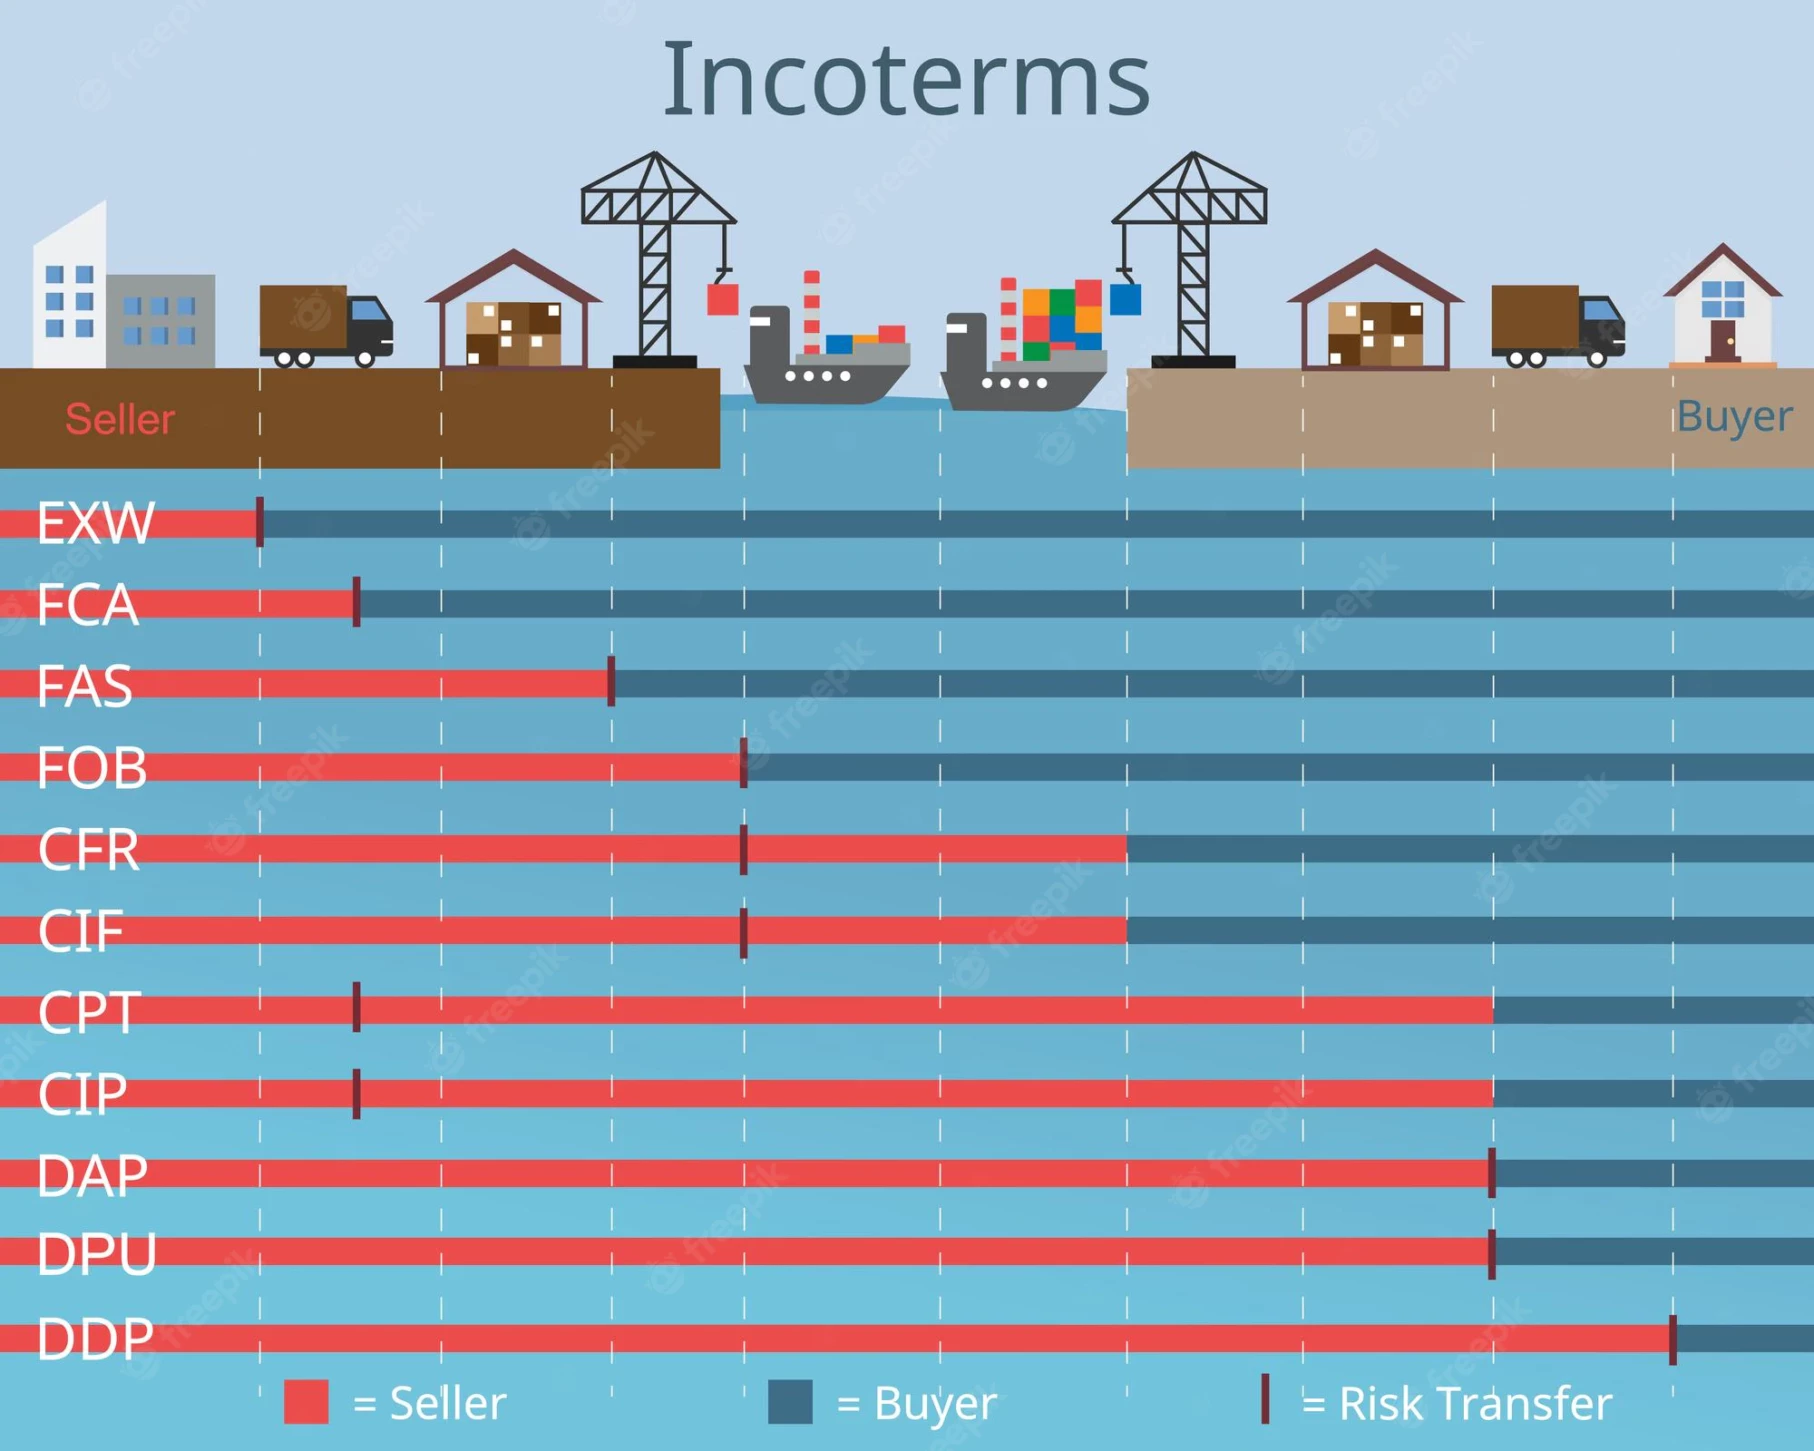 Cif Vs Cip Incoterms Explained Icontainers 41 Off 8456